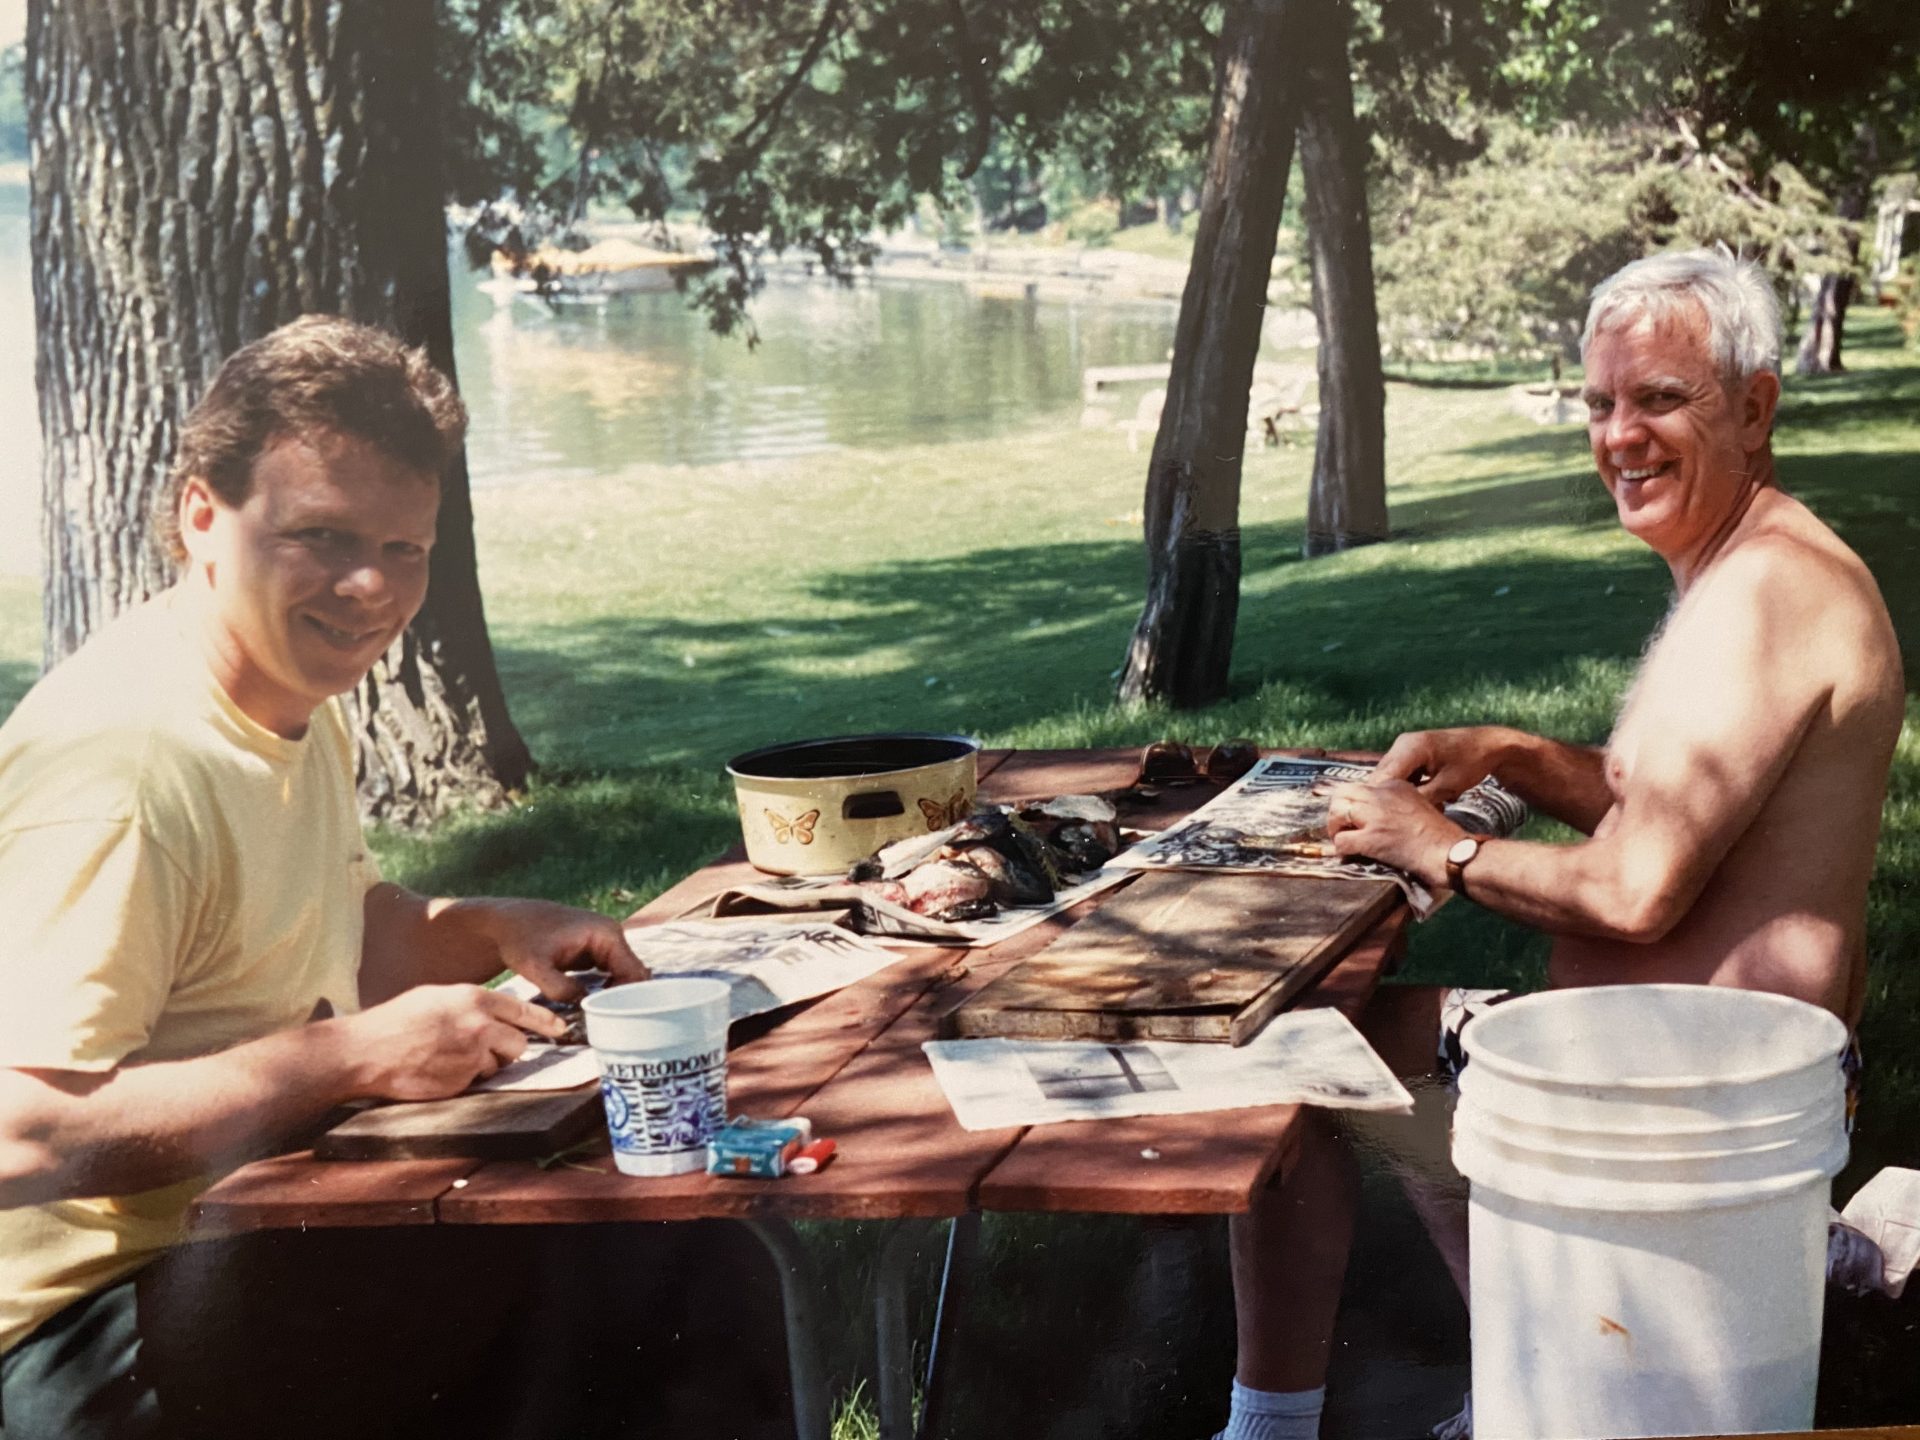 Dad and Jim cleaning fish after a good day of fishing on the lake in Minnesota.